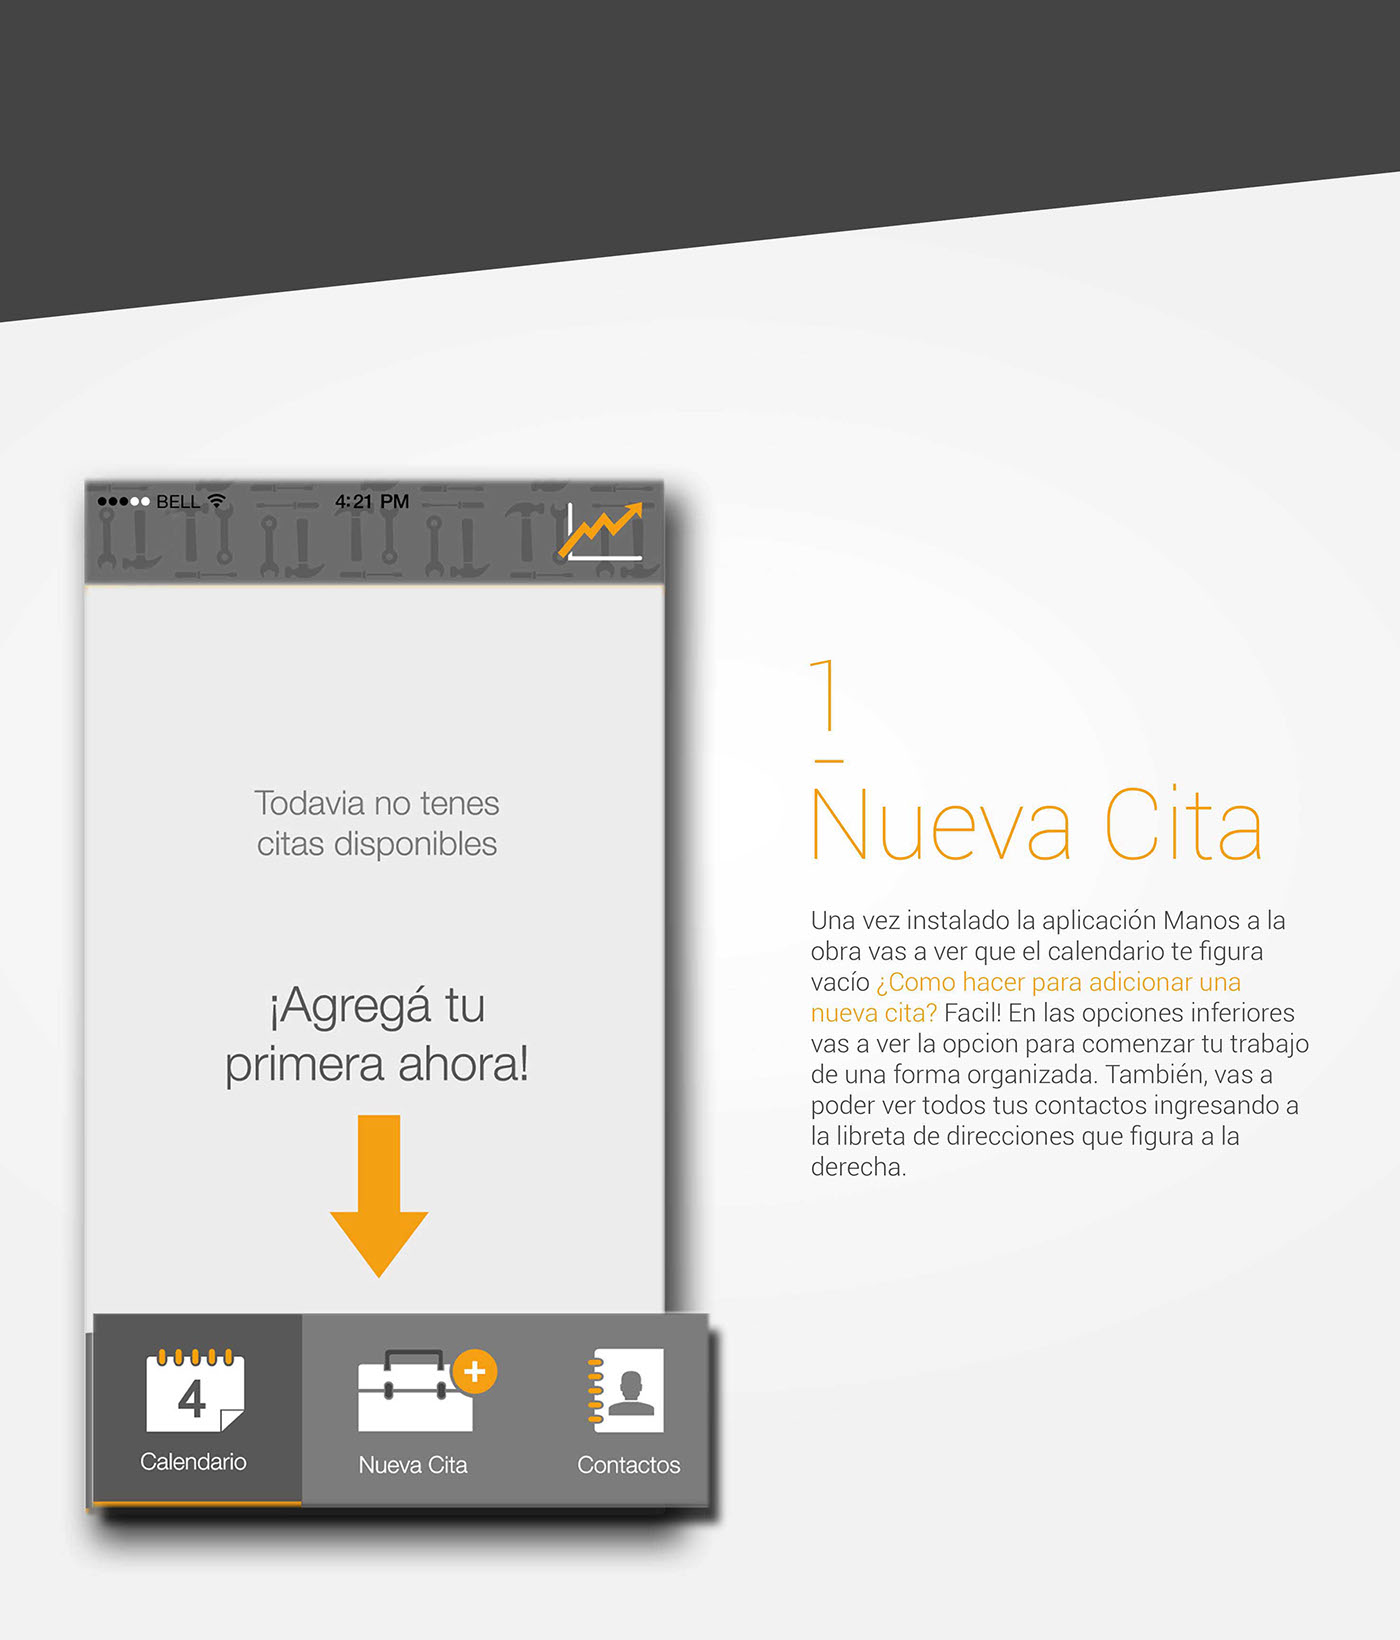 wolkowicz diseño app design ux mobile Responsive icons Layout interactive